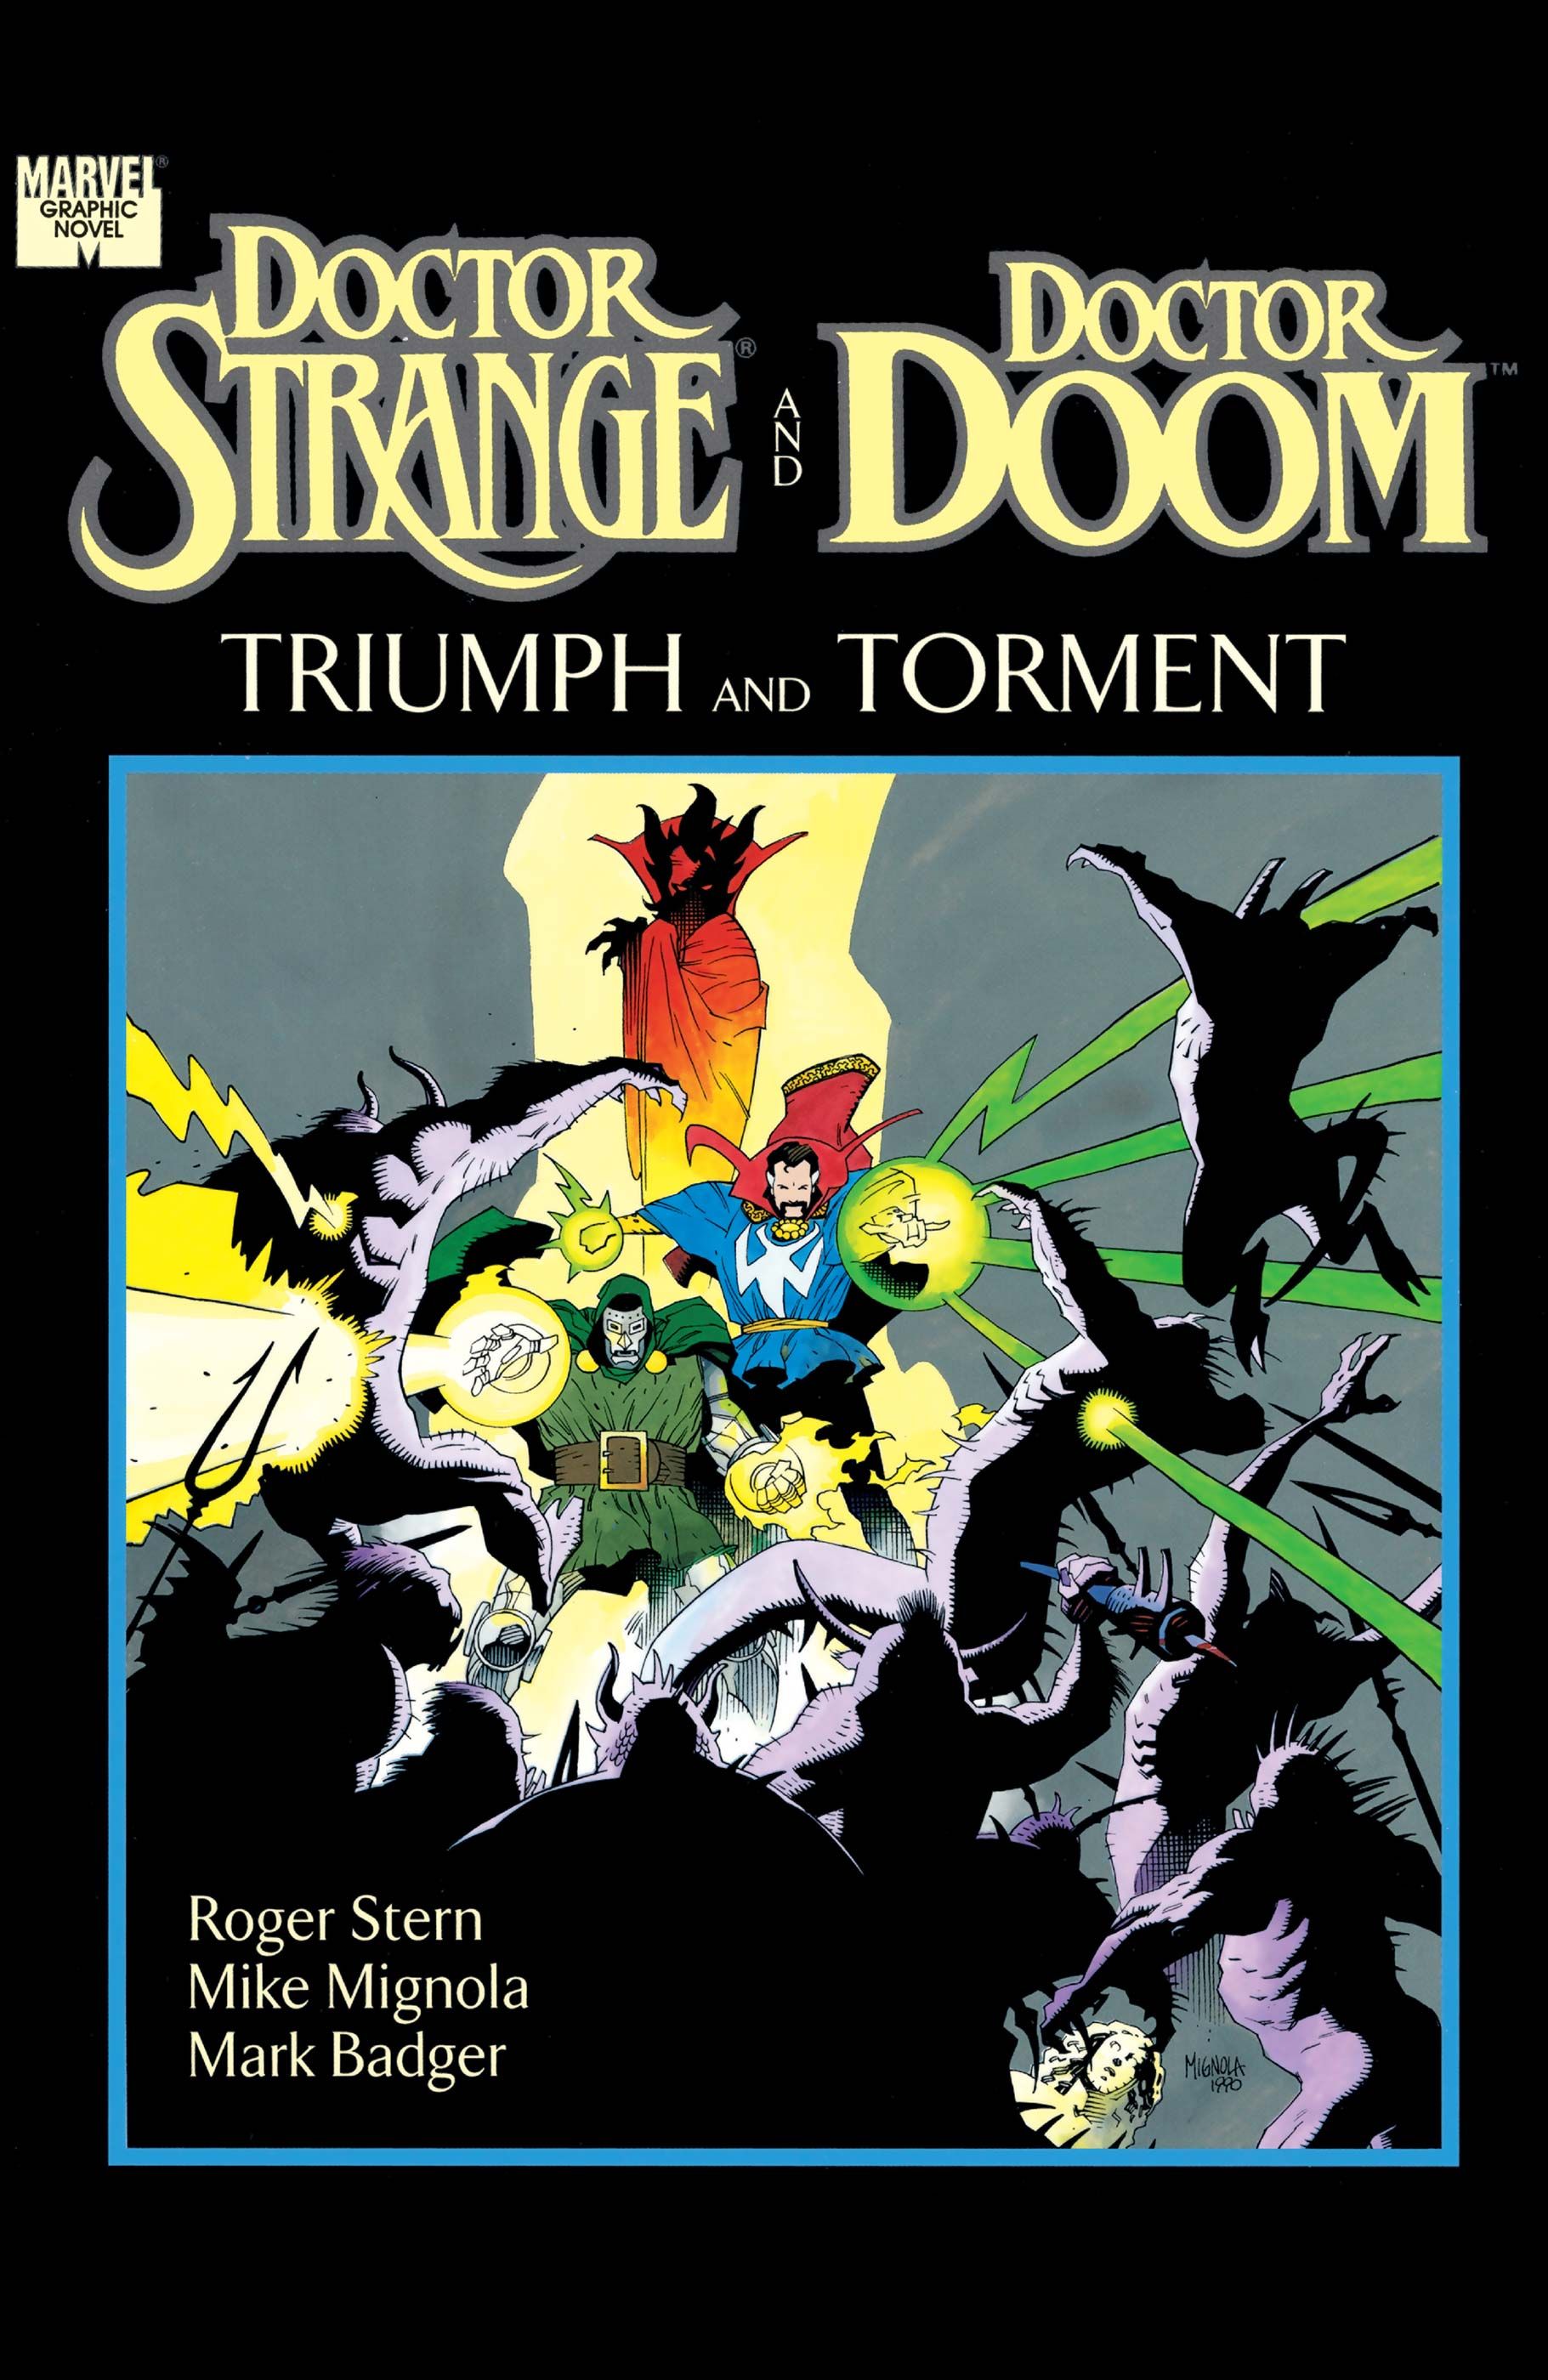 The cast fights on the cover of Doctor Strange and Doctor Doom Triumph and Torment